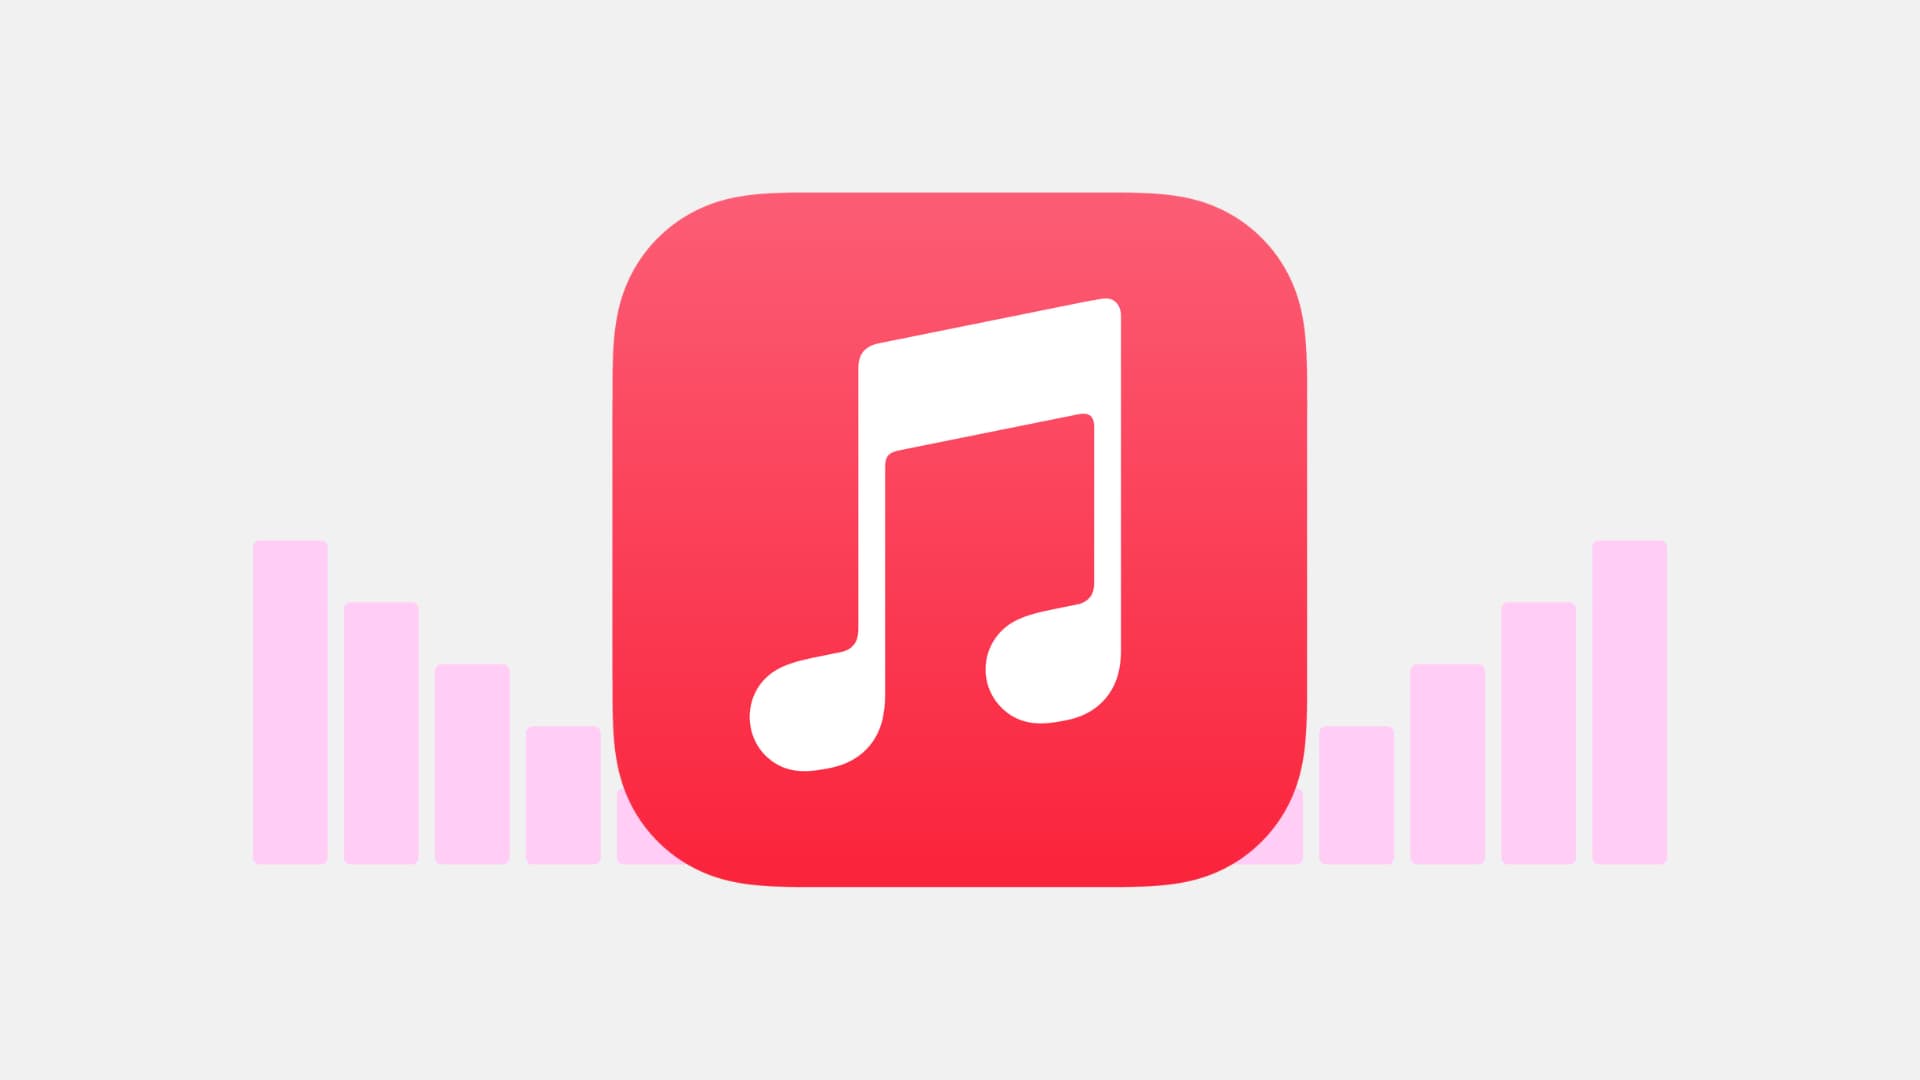 Apple Music icon with graph icons to show different sound levels